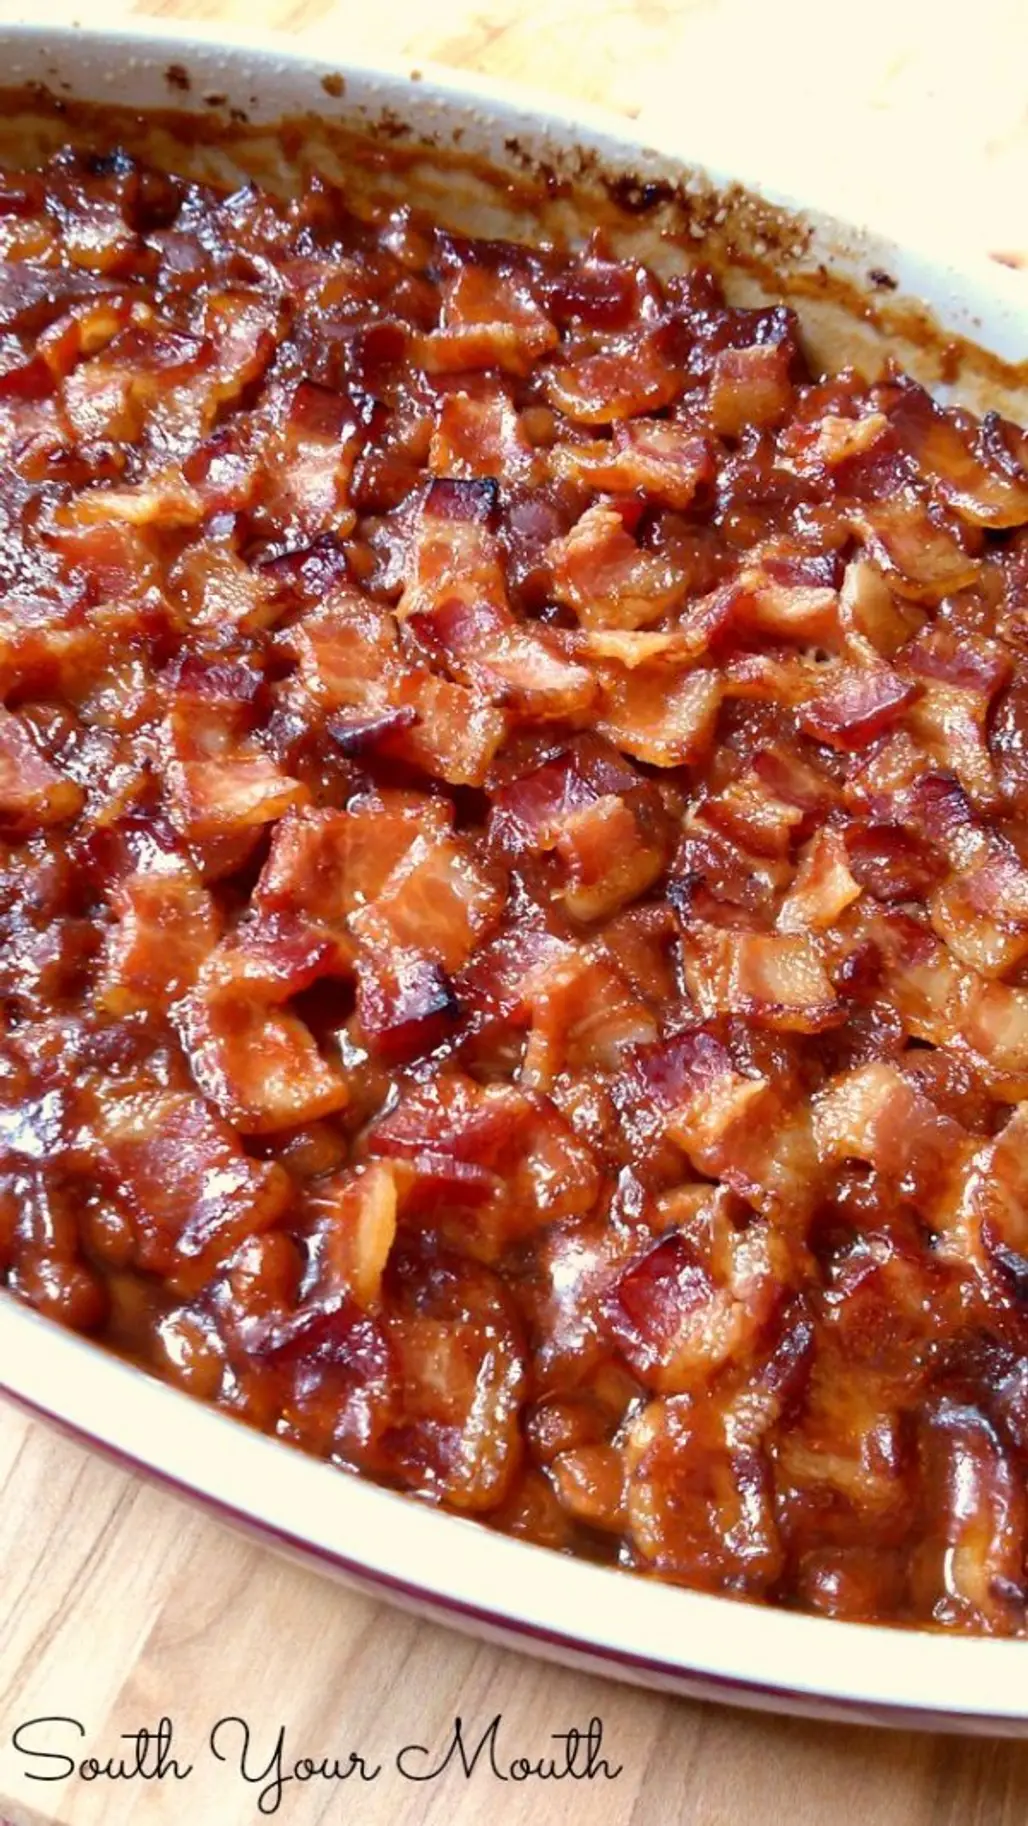 SOUTHERN STYLE BAKED BEANS